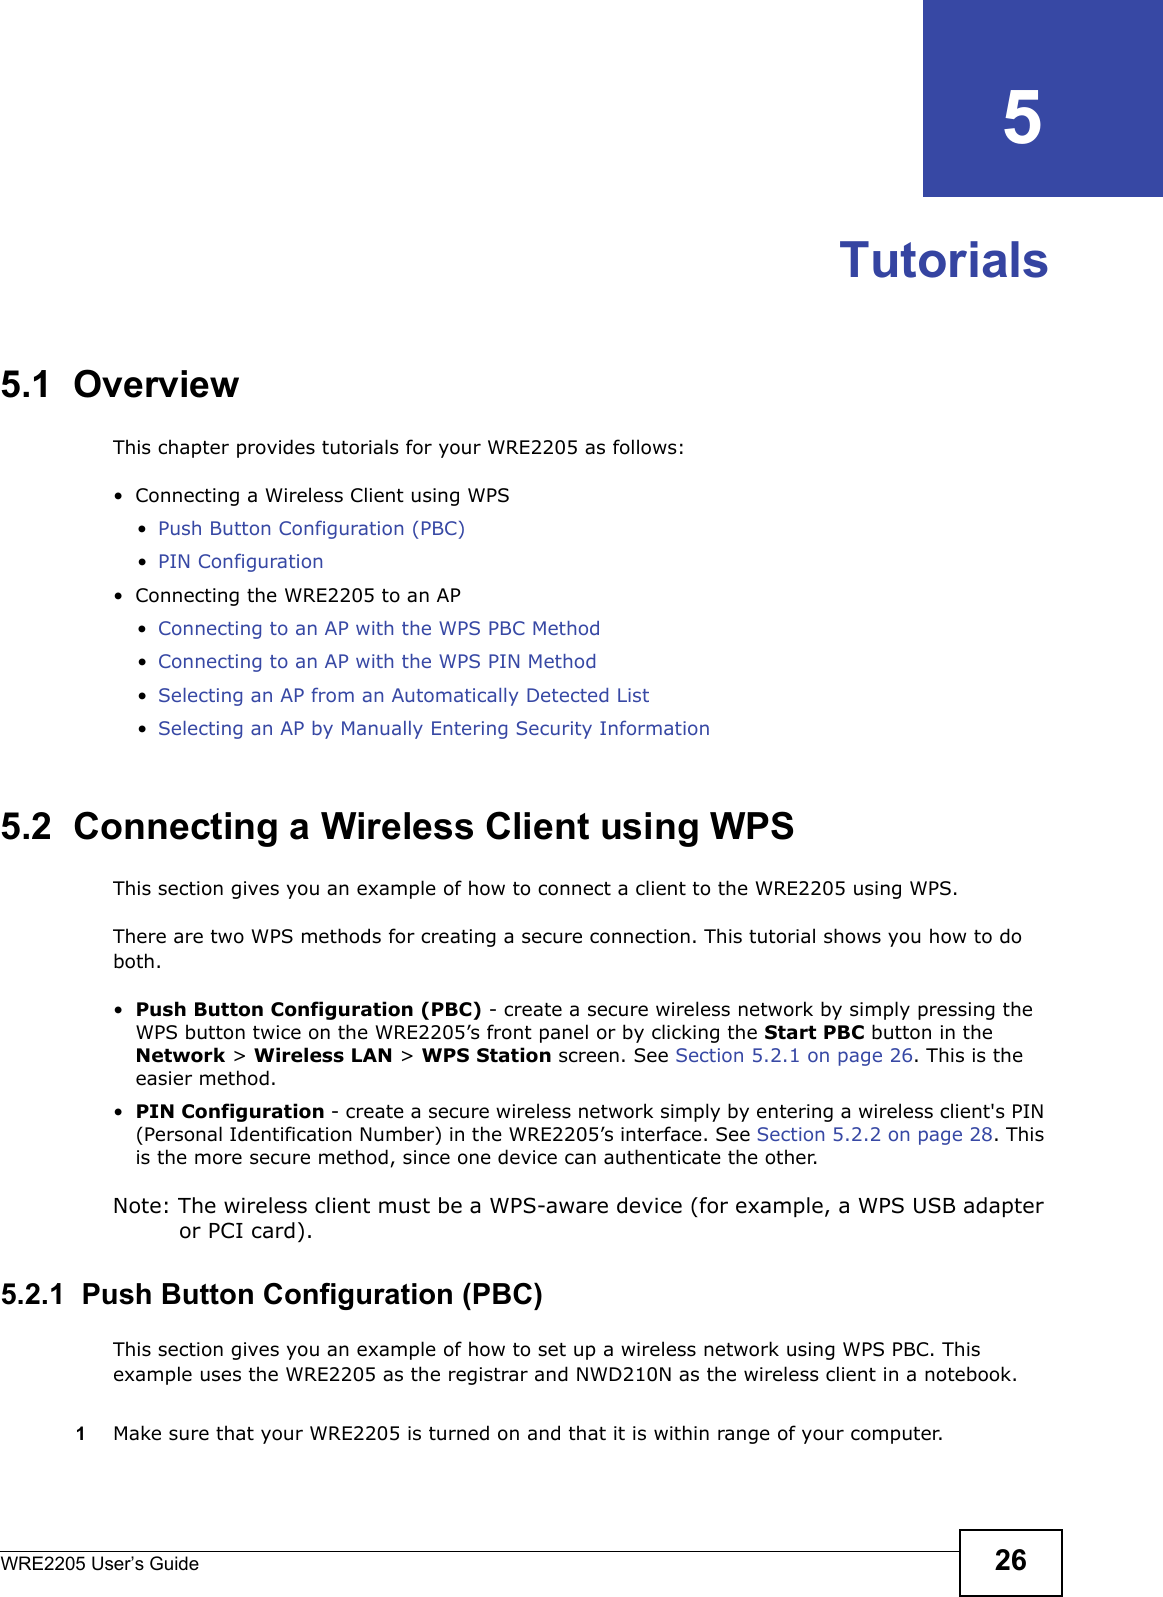 WRE2205 User’s Guide 26CHAPTER   5Tutorials5.1  OverviewThis chapter provides tutorials for your WRE2205 as follows:• Connecting a Wireless Client using WPS•Push Button Configuration (PBC)•PIN Configuration• Connecting the WRE2205 to an AP•Connecting to an AP with the WPS PBC Method•Connecting to an AP with the WPS PIN Method•Selecting an AP from an Automatically Detected List•Selecting an AP by Manually Entering Security Information5.2  Connecting a Wireless Client using WPSThis section gives you an example of how to connect a client to the WRE2205 using WPS.There are two WPS methods for creating a secure connection. This tutorial shows you how to do both.•Push Button Configuration (PBC) - create a secure wireless network by simply pressing the WPS button twice on the WRE2205’s front panel or by clicking the Start PBC button in the Network &gt; Wireless LAN &gt; WPS Station screen. See Section 5.2.1 on page 26. This is the easier method.•PIN Configuration - create a secure wireless network simply by entering a wireless client&apos;s PIN (Personal Identification Number) in the WRE2205’s interface. See Section 5.2.2 on page 28. This is the more secure method, since one device can authenticate the other.Note: The wireless client must be a WPS-aware device (for example, a WPS USB adapter or PCI card).5.2.1  Push Button Configuration (PBC)This section gives you an example of how to set up a wireless network using WPS PBC. This example uses the WRE2205 as the registrar and NWD210N as the wireless client in a notebook.1Make sure that your WRE2205 is turned on and that it is within range of your computer. 